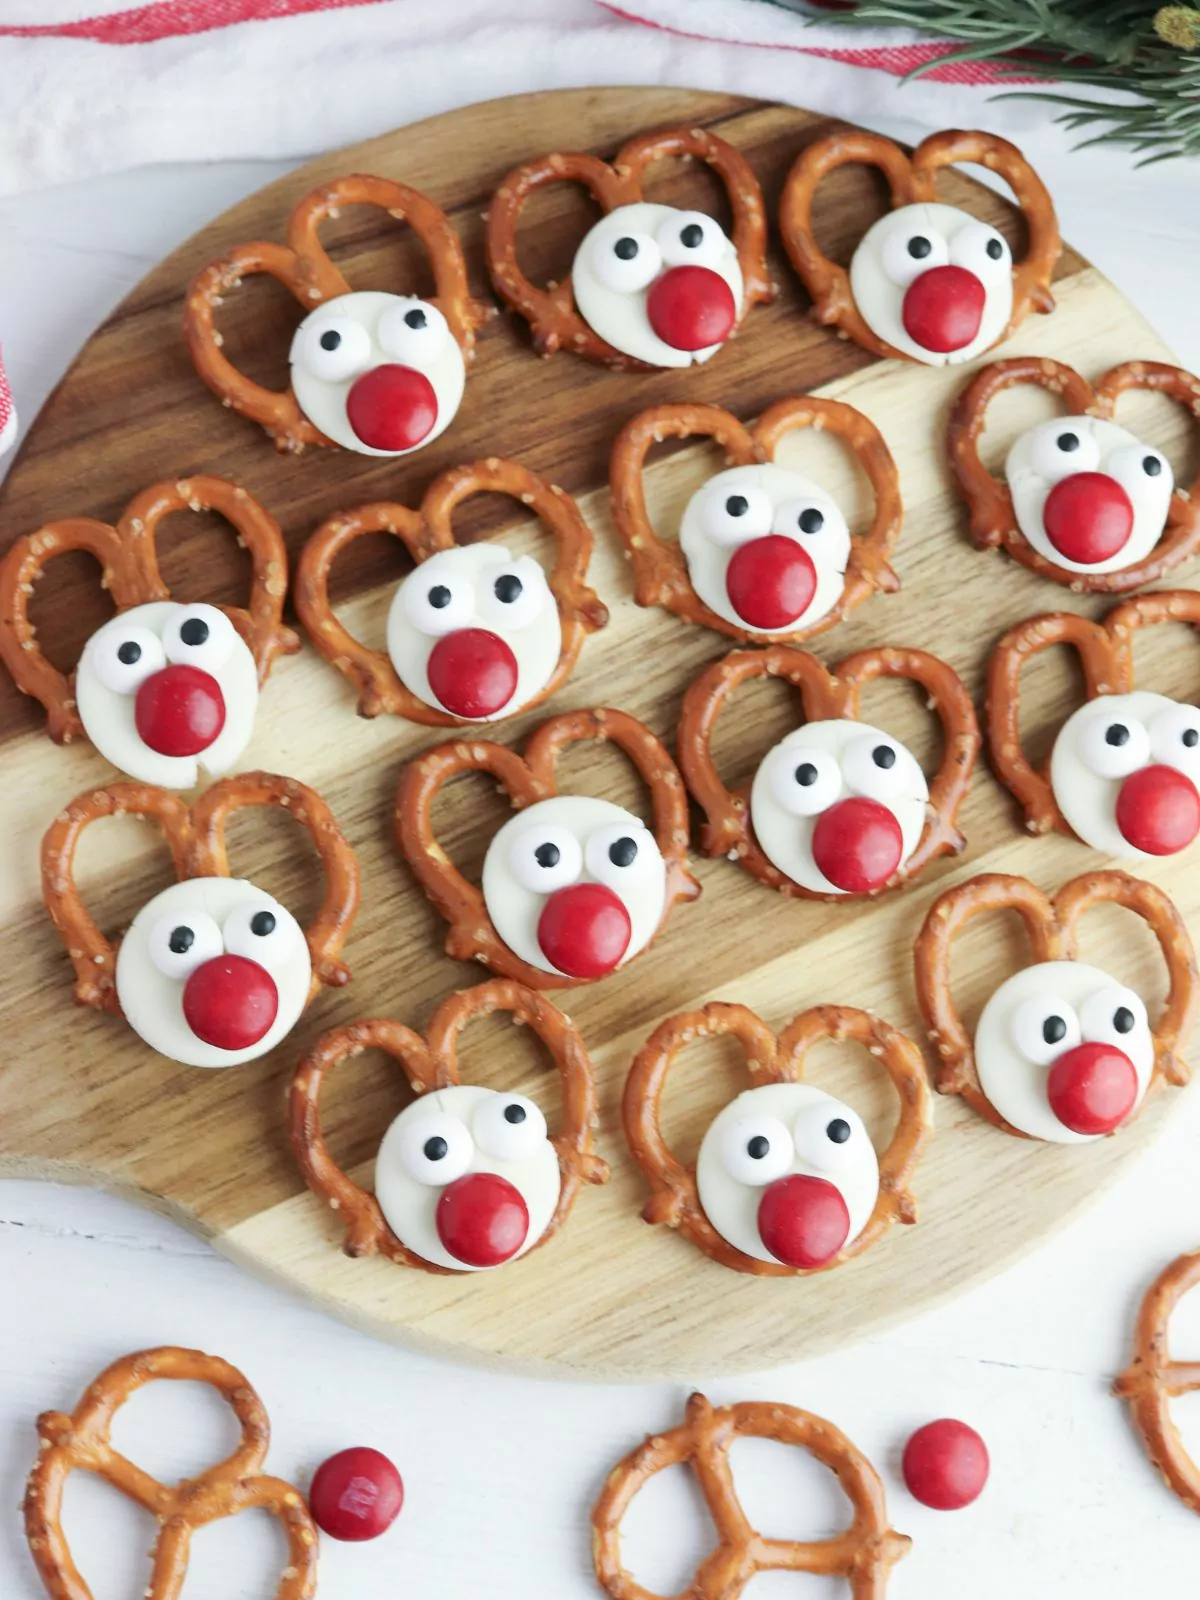 pretzels made to look like reindeers with candy.